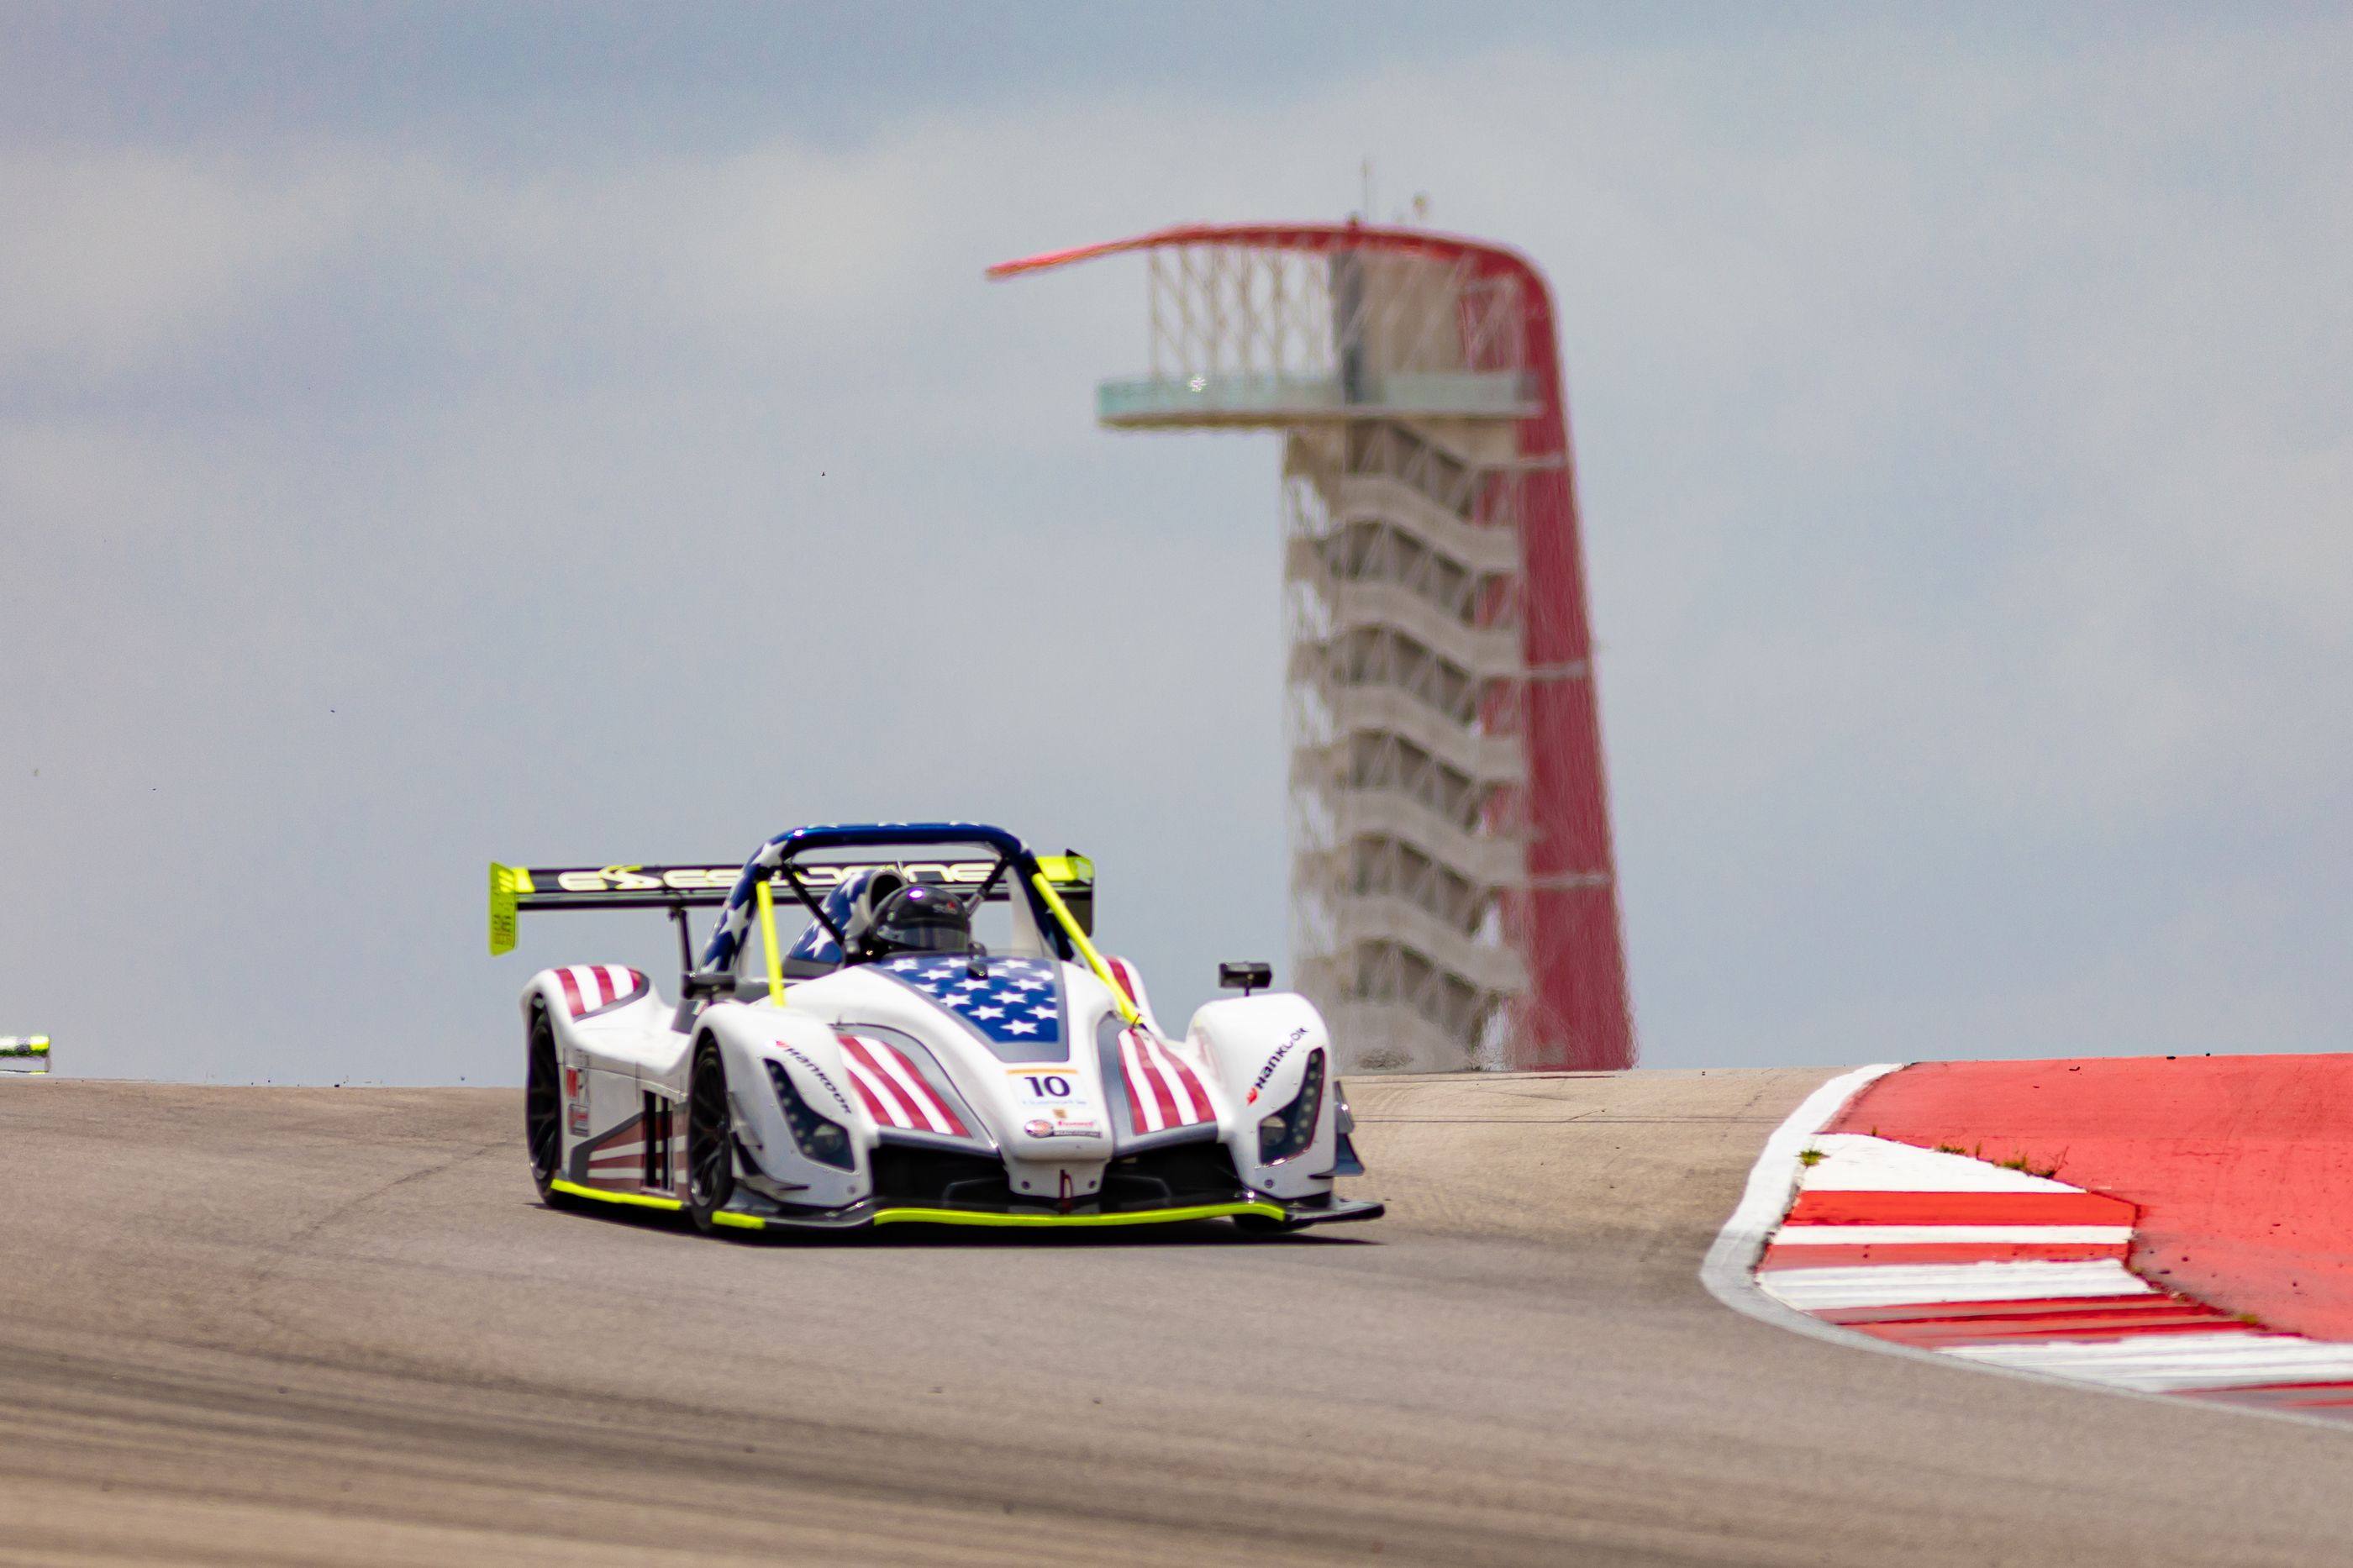 Over Thirty Cars for Penultimate Round of Radical Cup at COTA